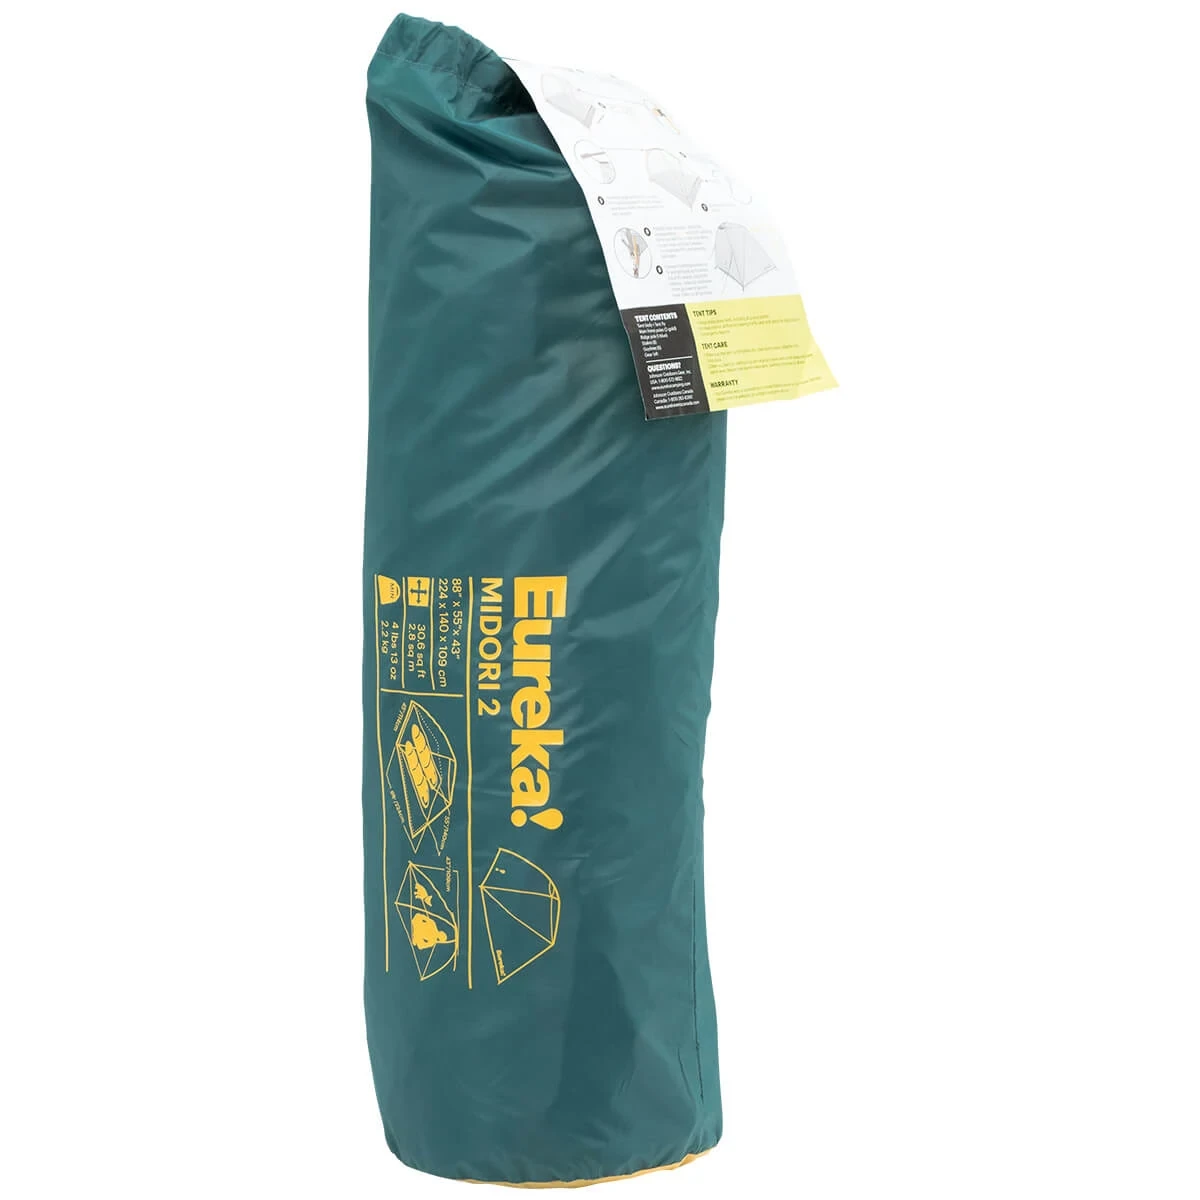 Packed Midori 2 tent in carry bag showing sewn in setup instructions